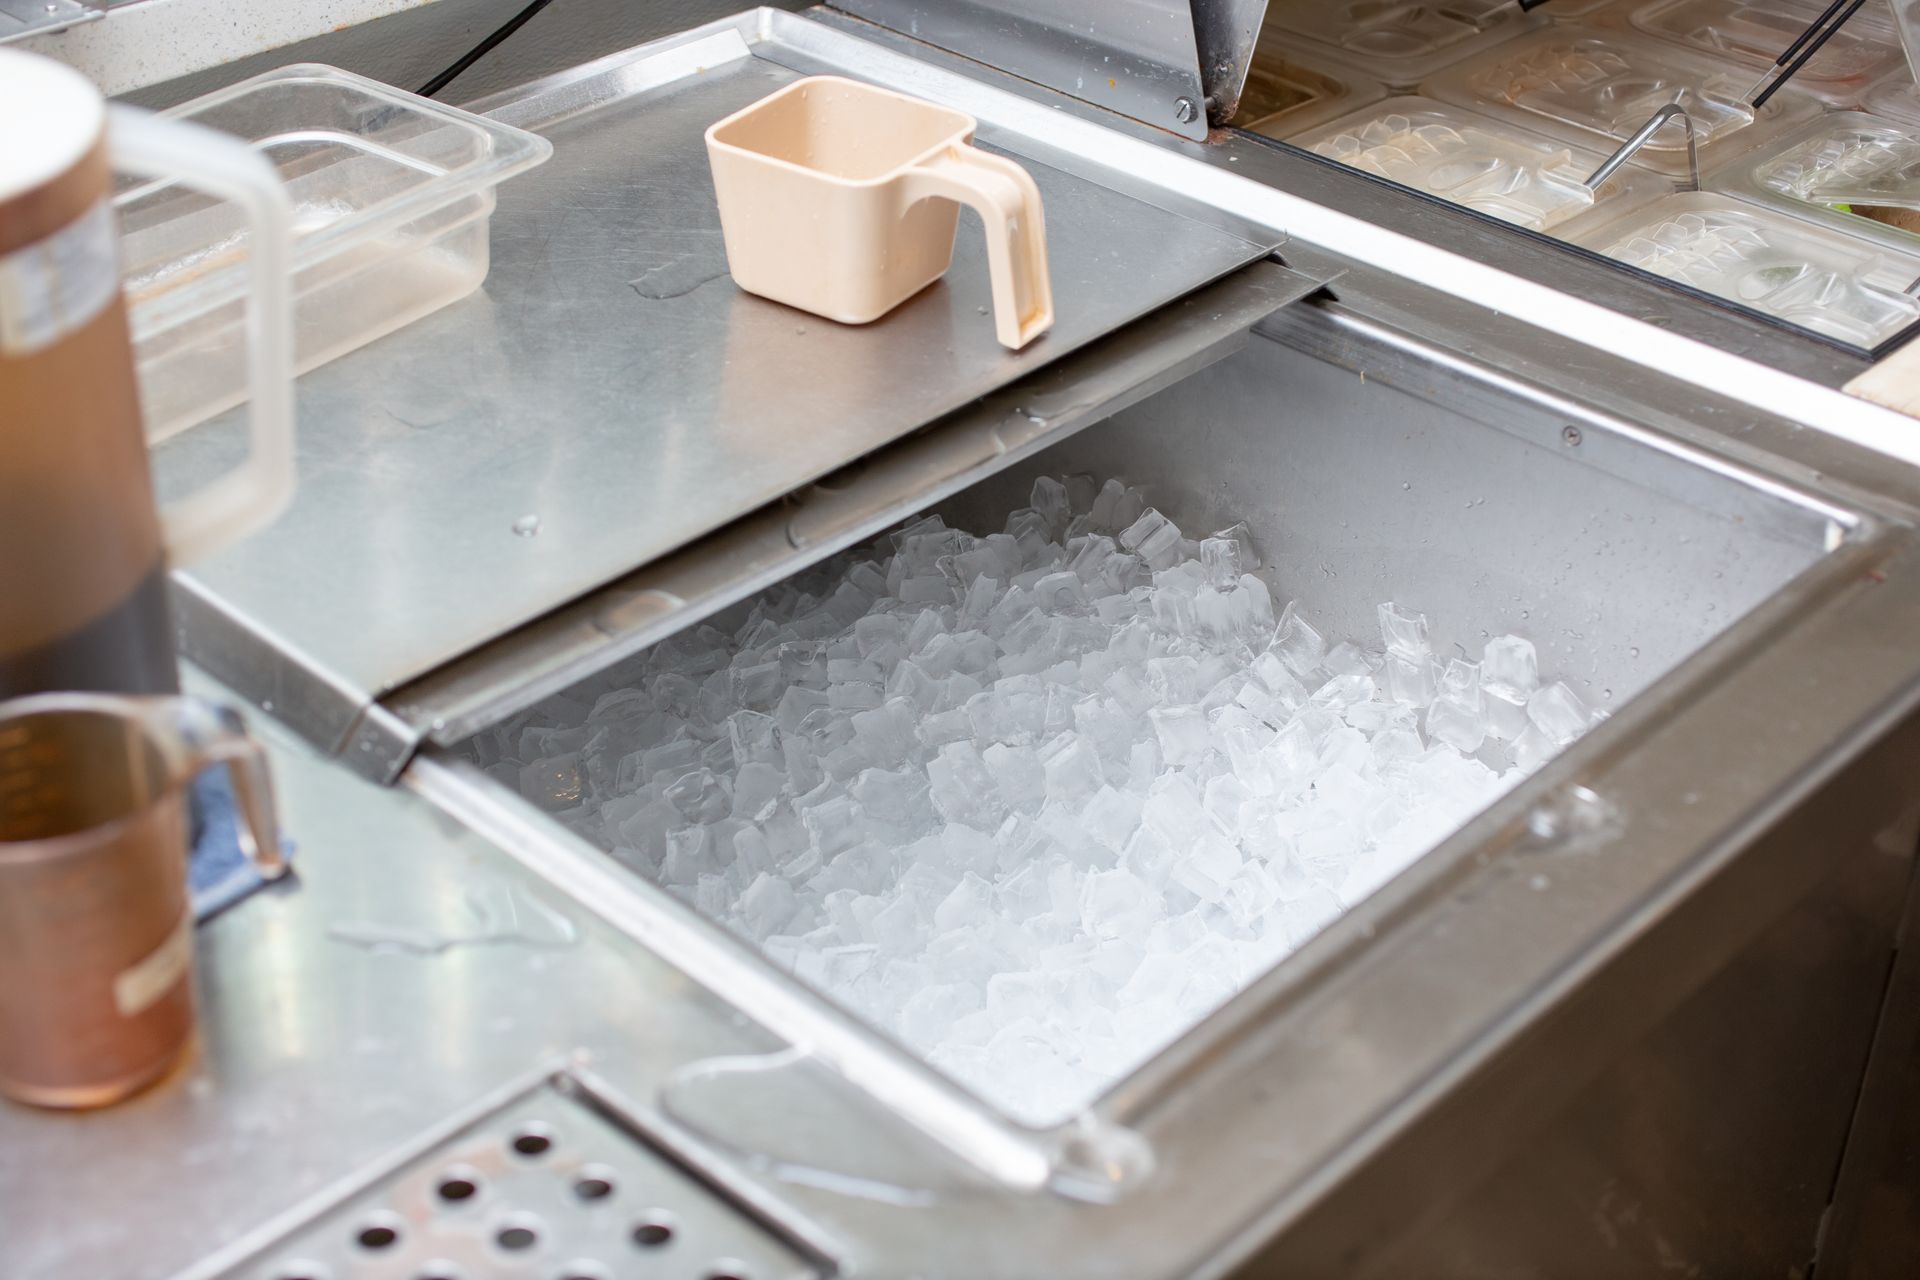 A tray of ice is sitting on top of a stainless steel counter.